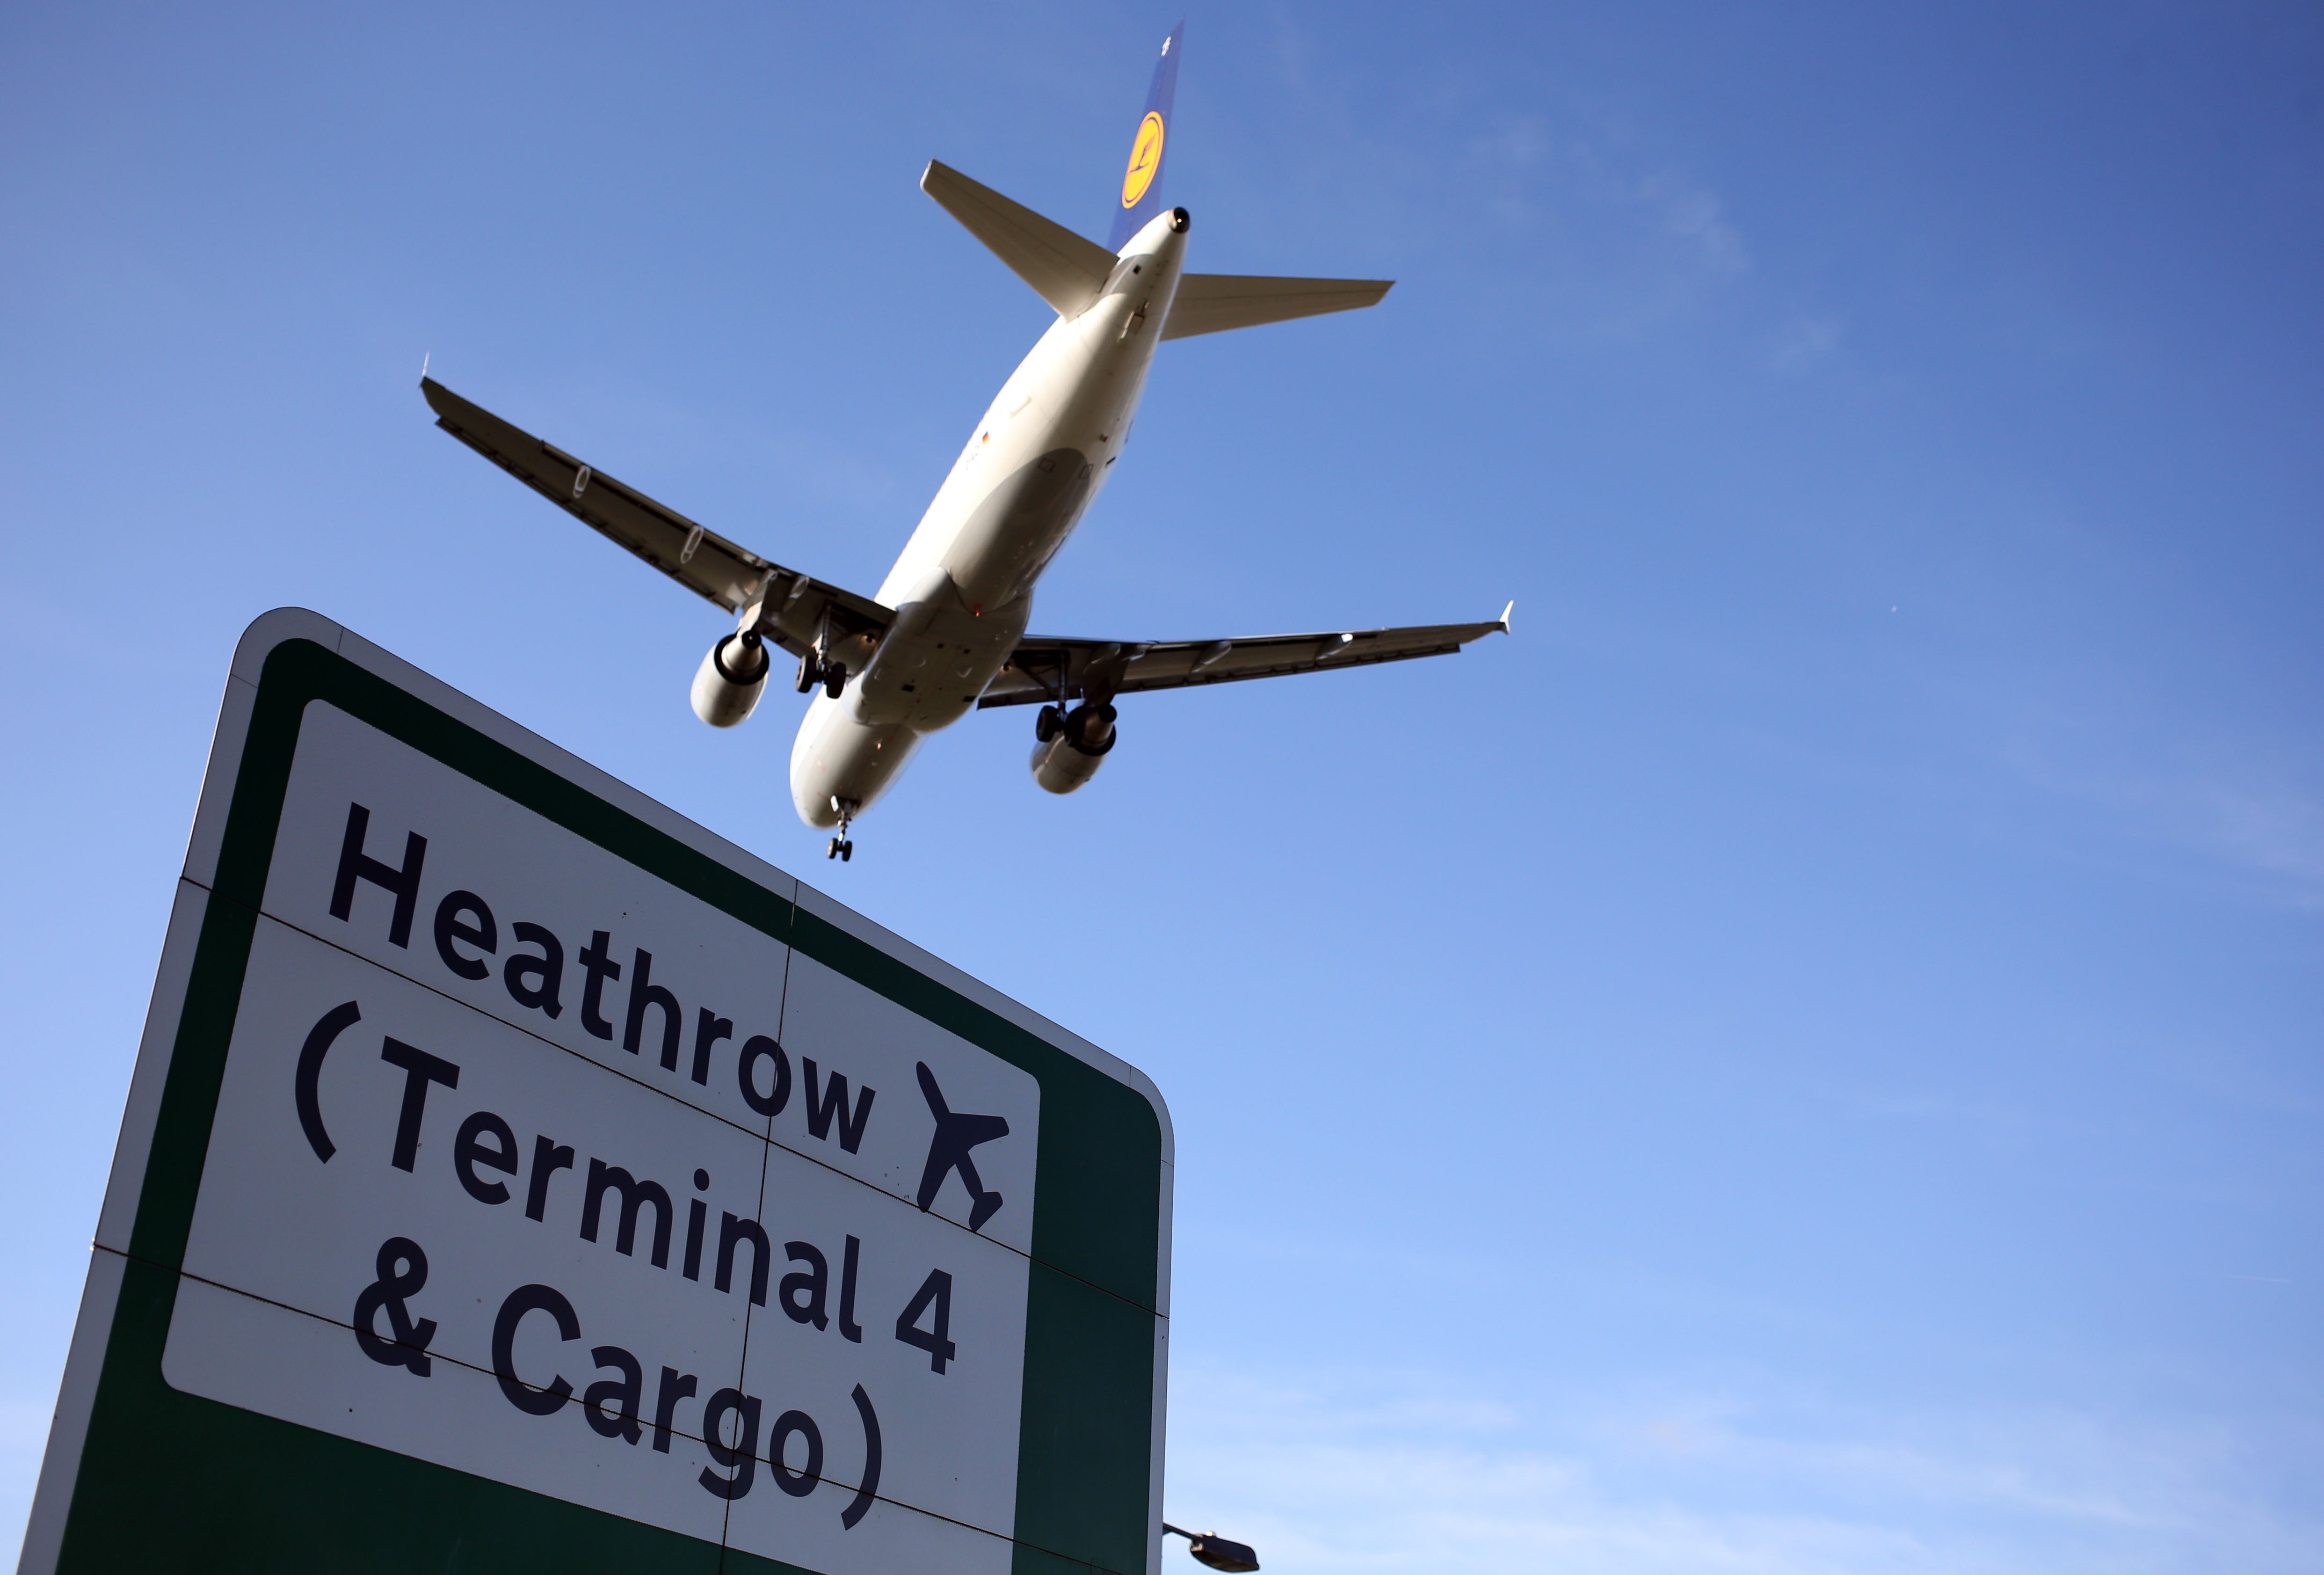 Heathrow has been given permission to raise charges by more than 50% from January 1 (Steve Parsons/PA)